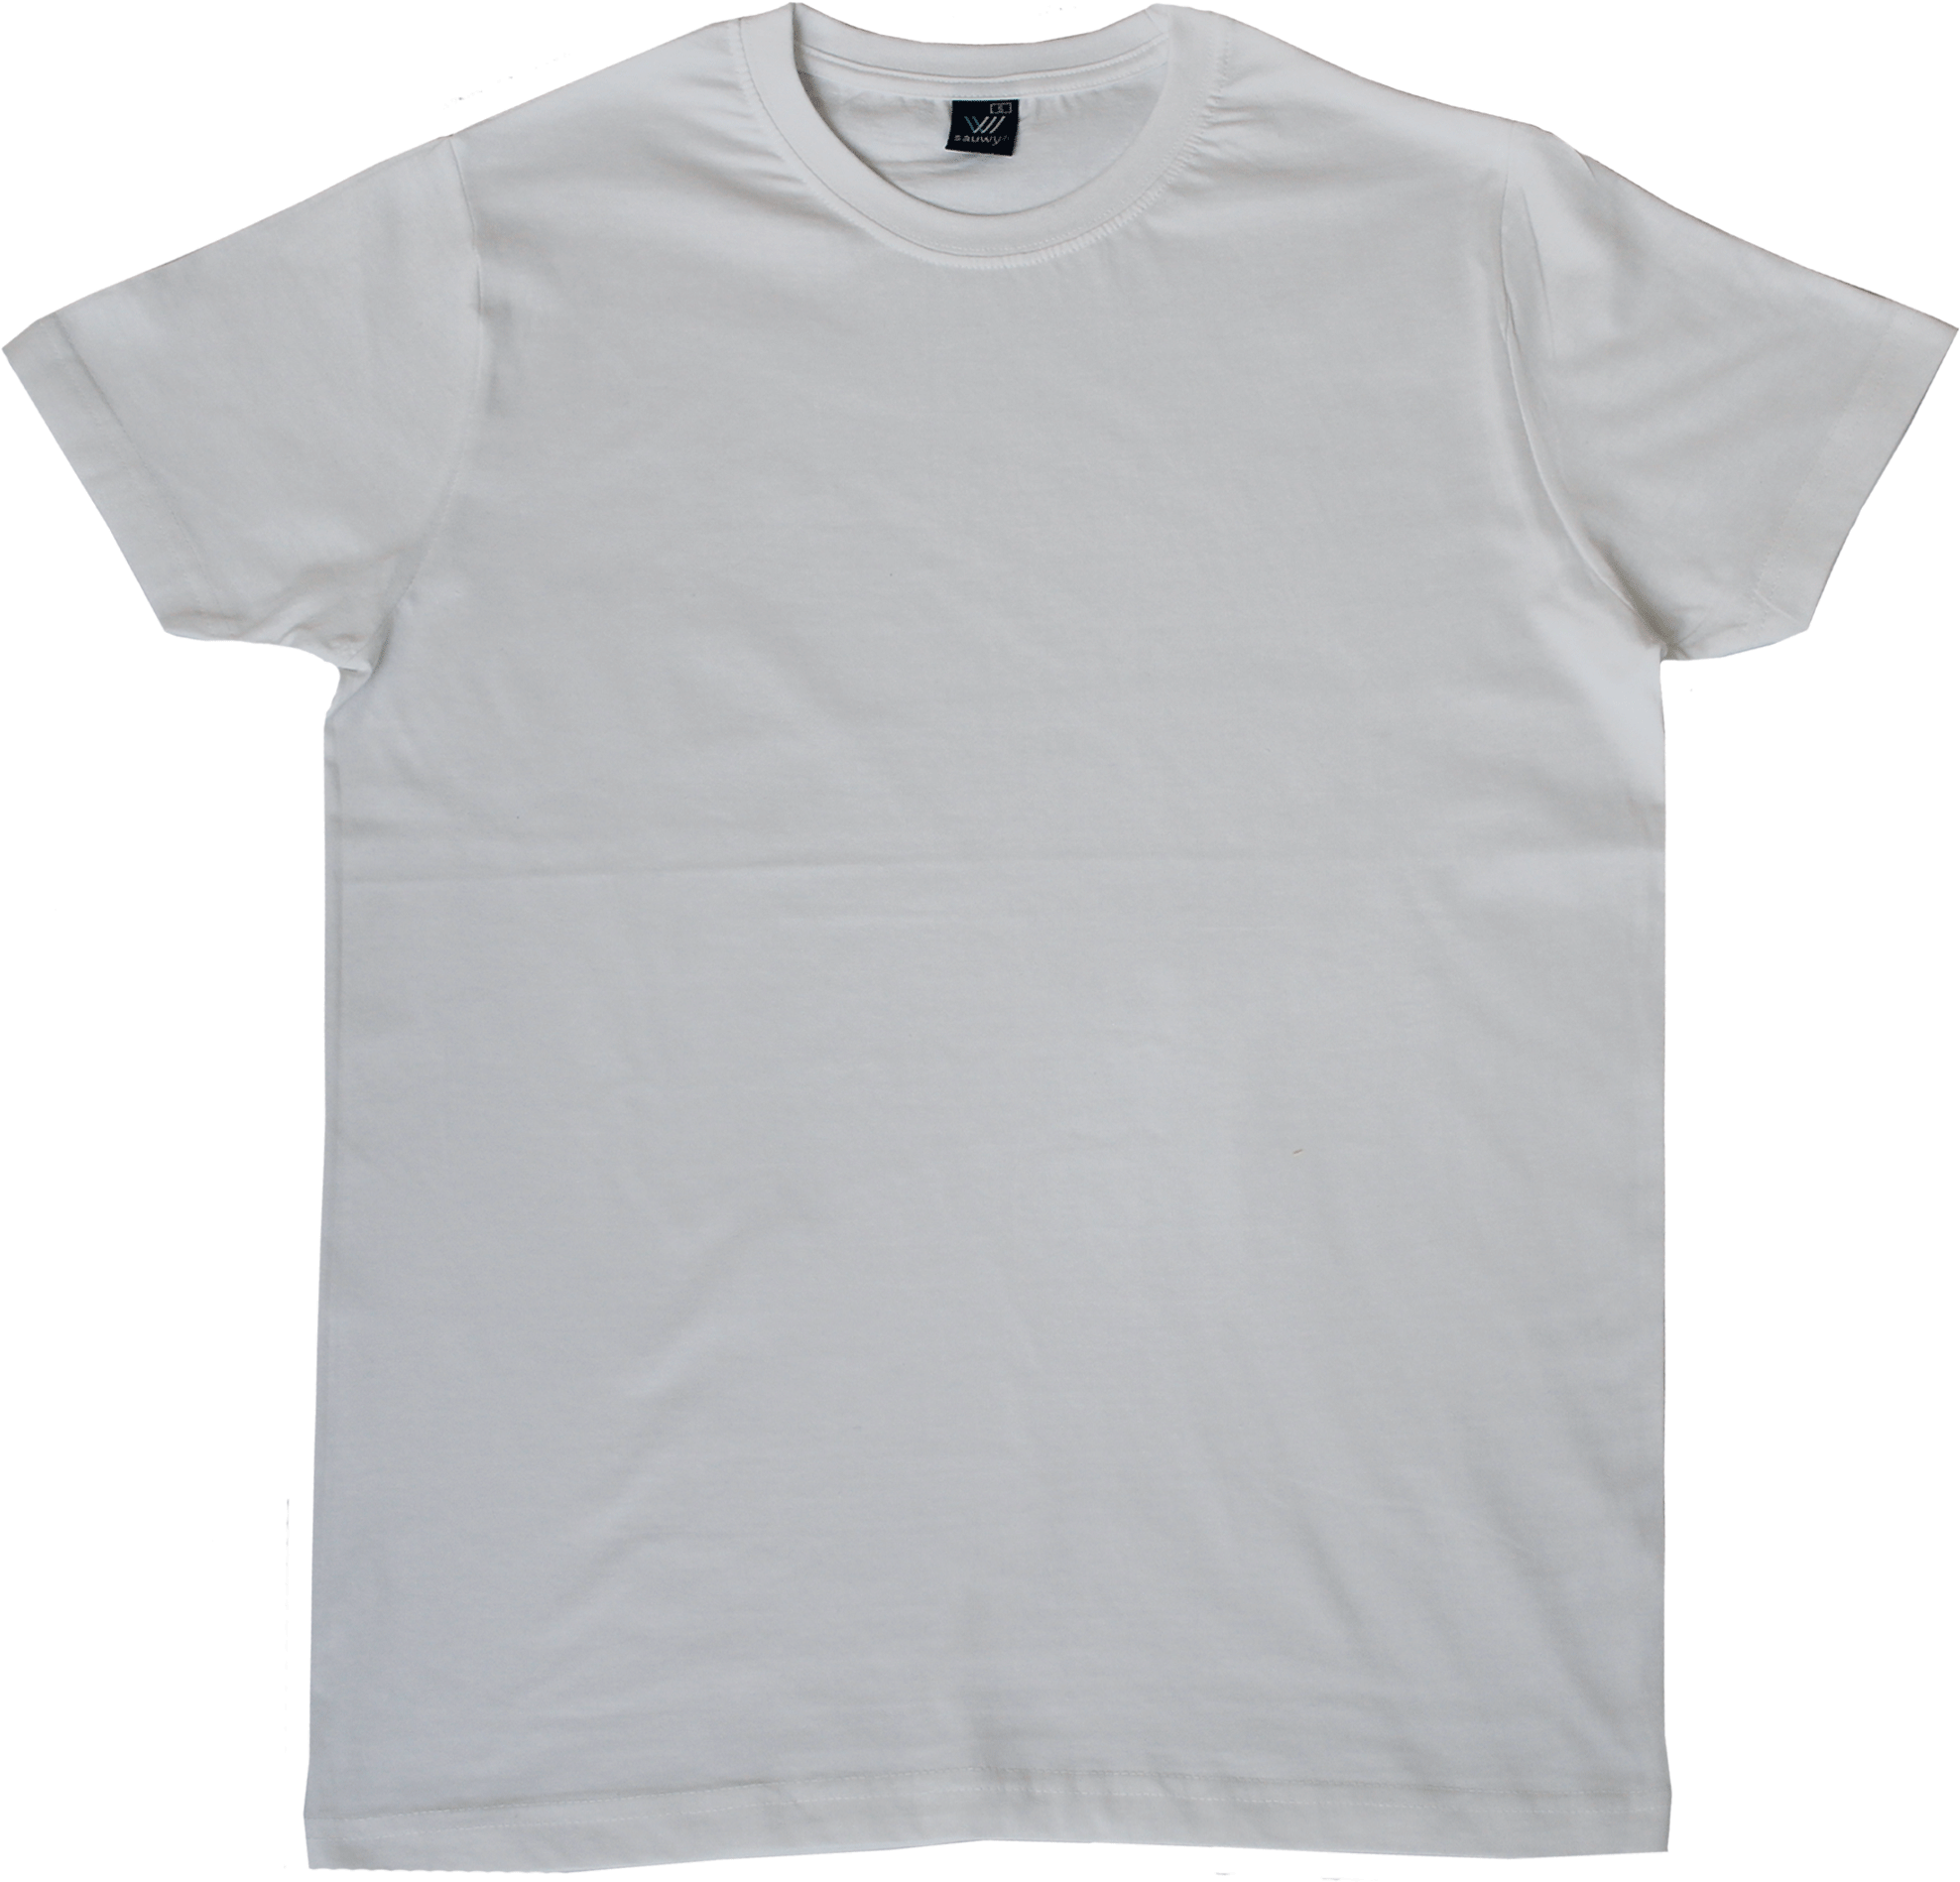 Download 145-blanca6 - Basic Tshirt PNG Image with No Background ...